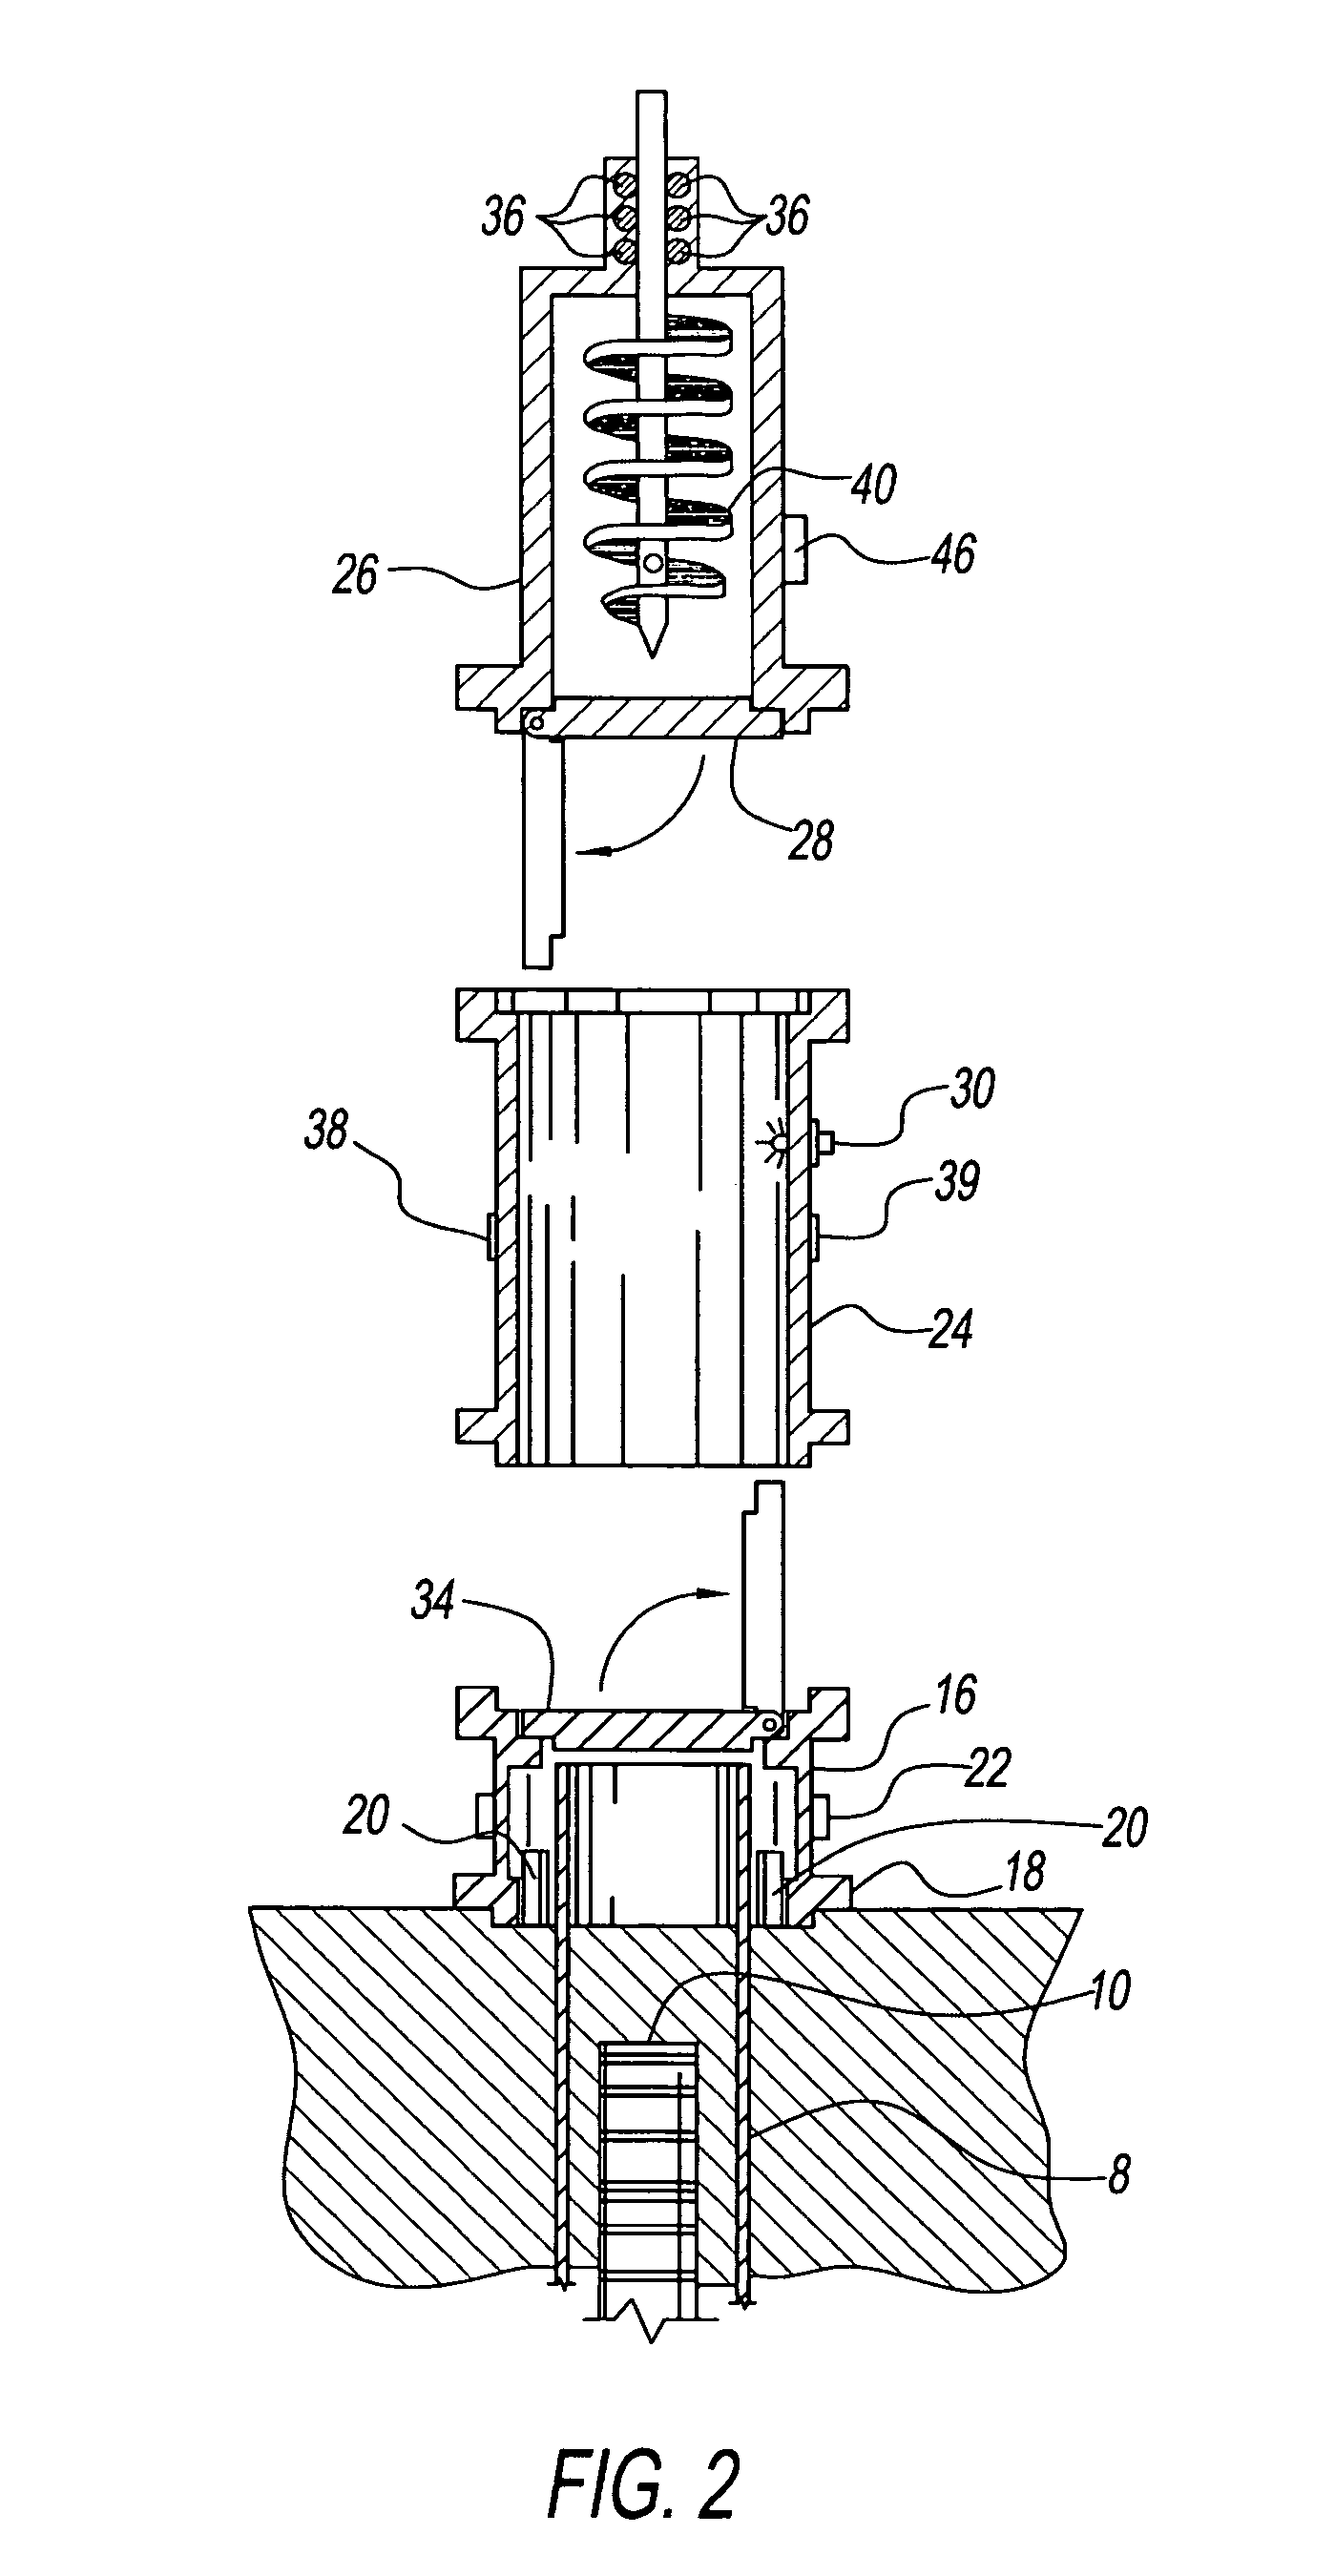 Method and apparatus for identification, stabilization and safe removal of radioactive waste and non hazardous waste contained in buried objects